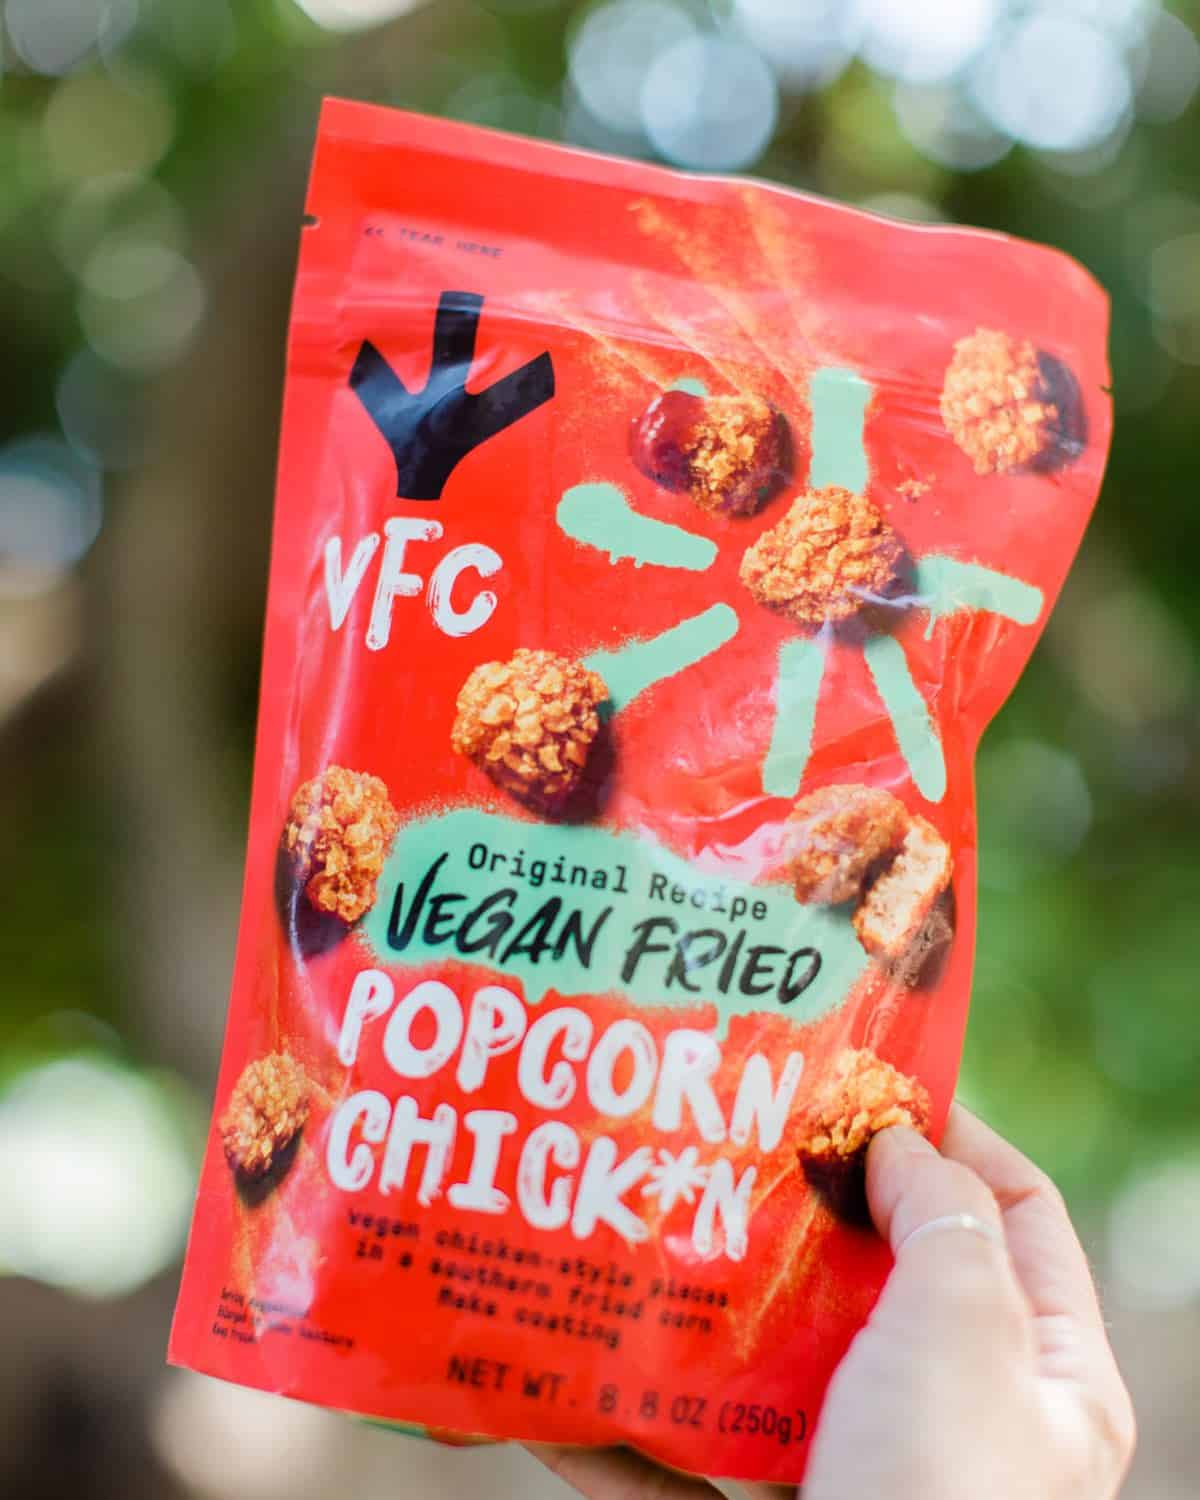 A red bag of frozen vegan popcorn chicken nuggets from the brand VFC. 